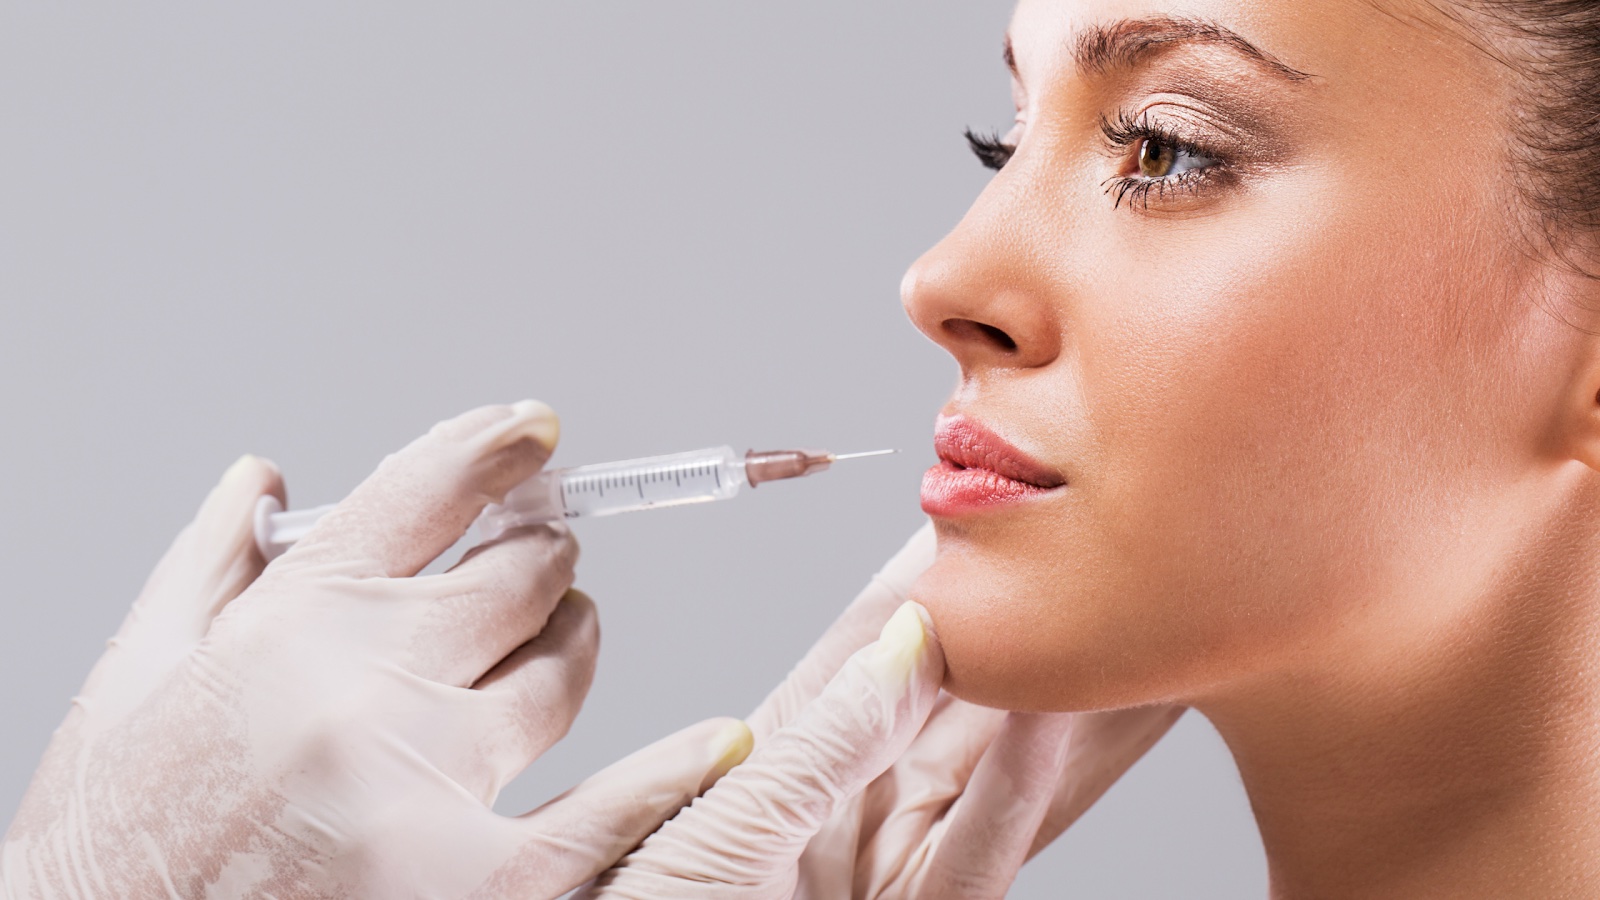 A lip filler practitioner is about to inject a young woman with dermal filler.